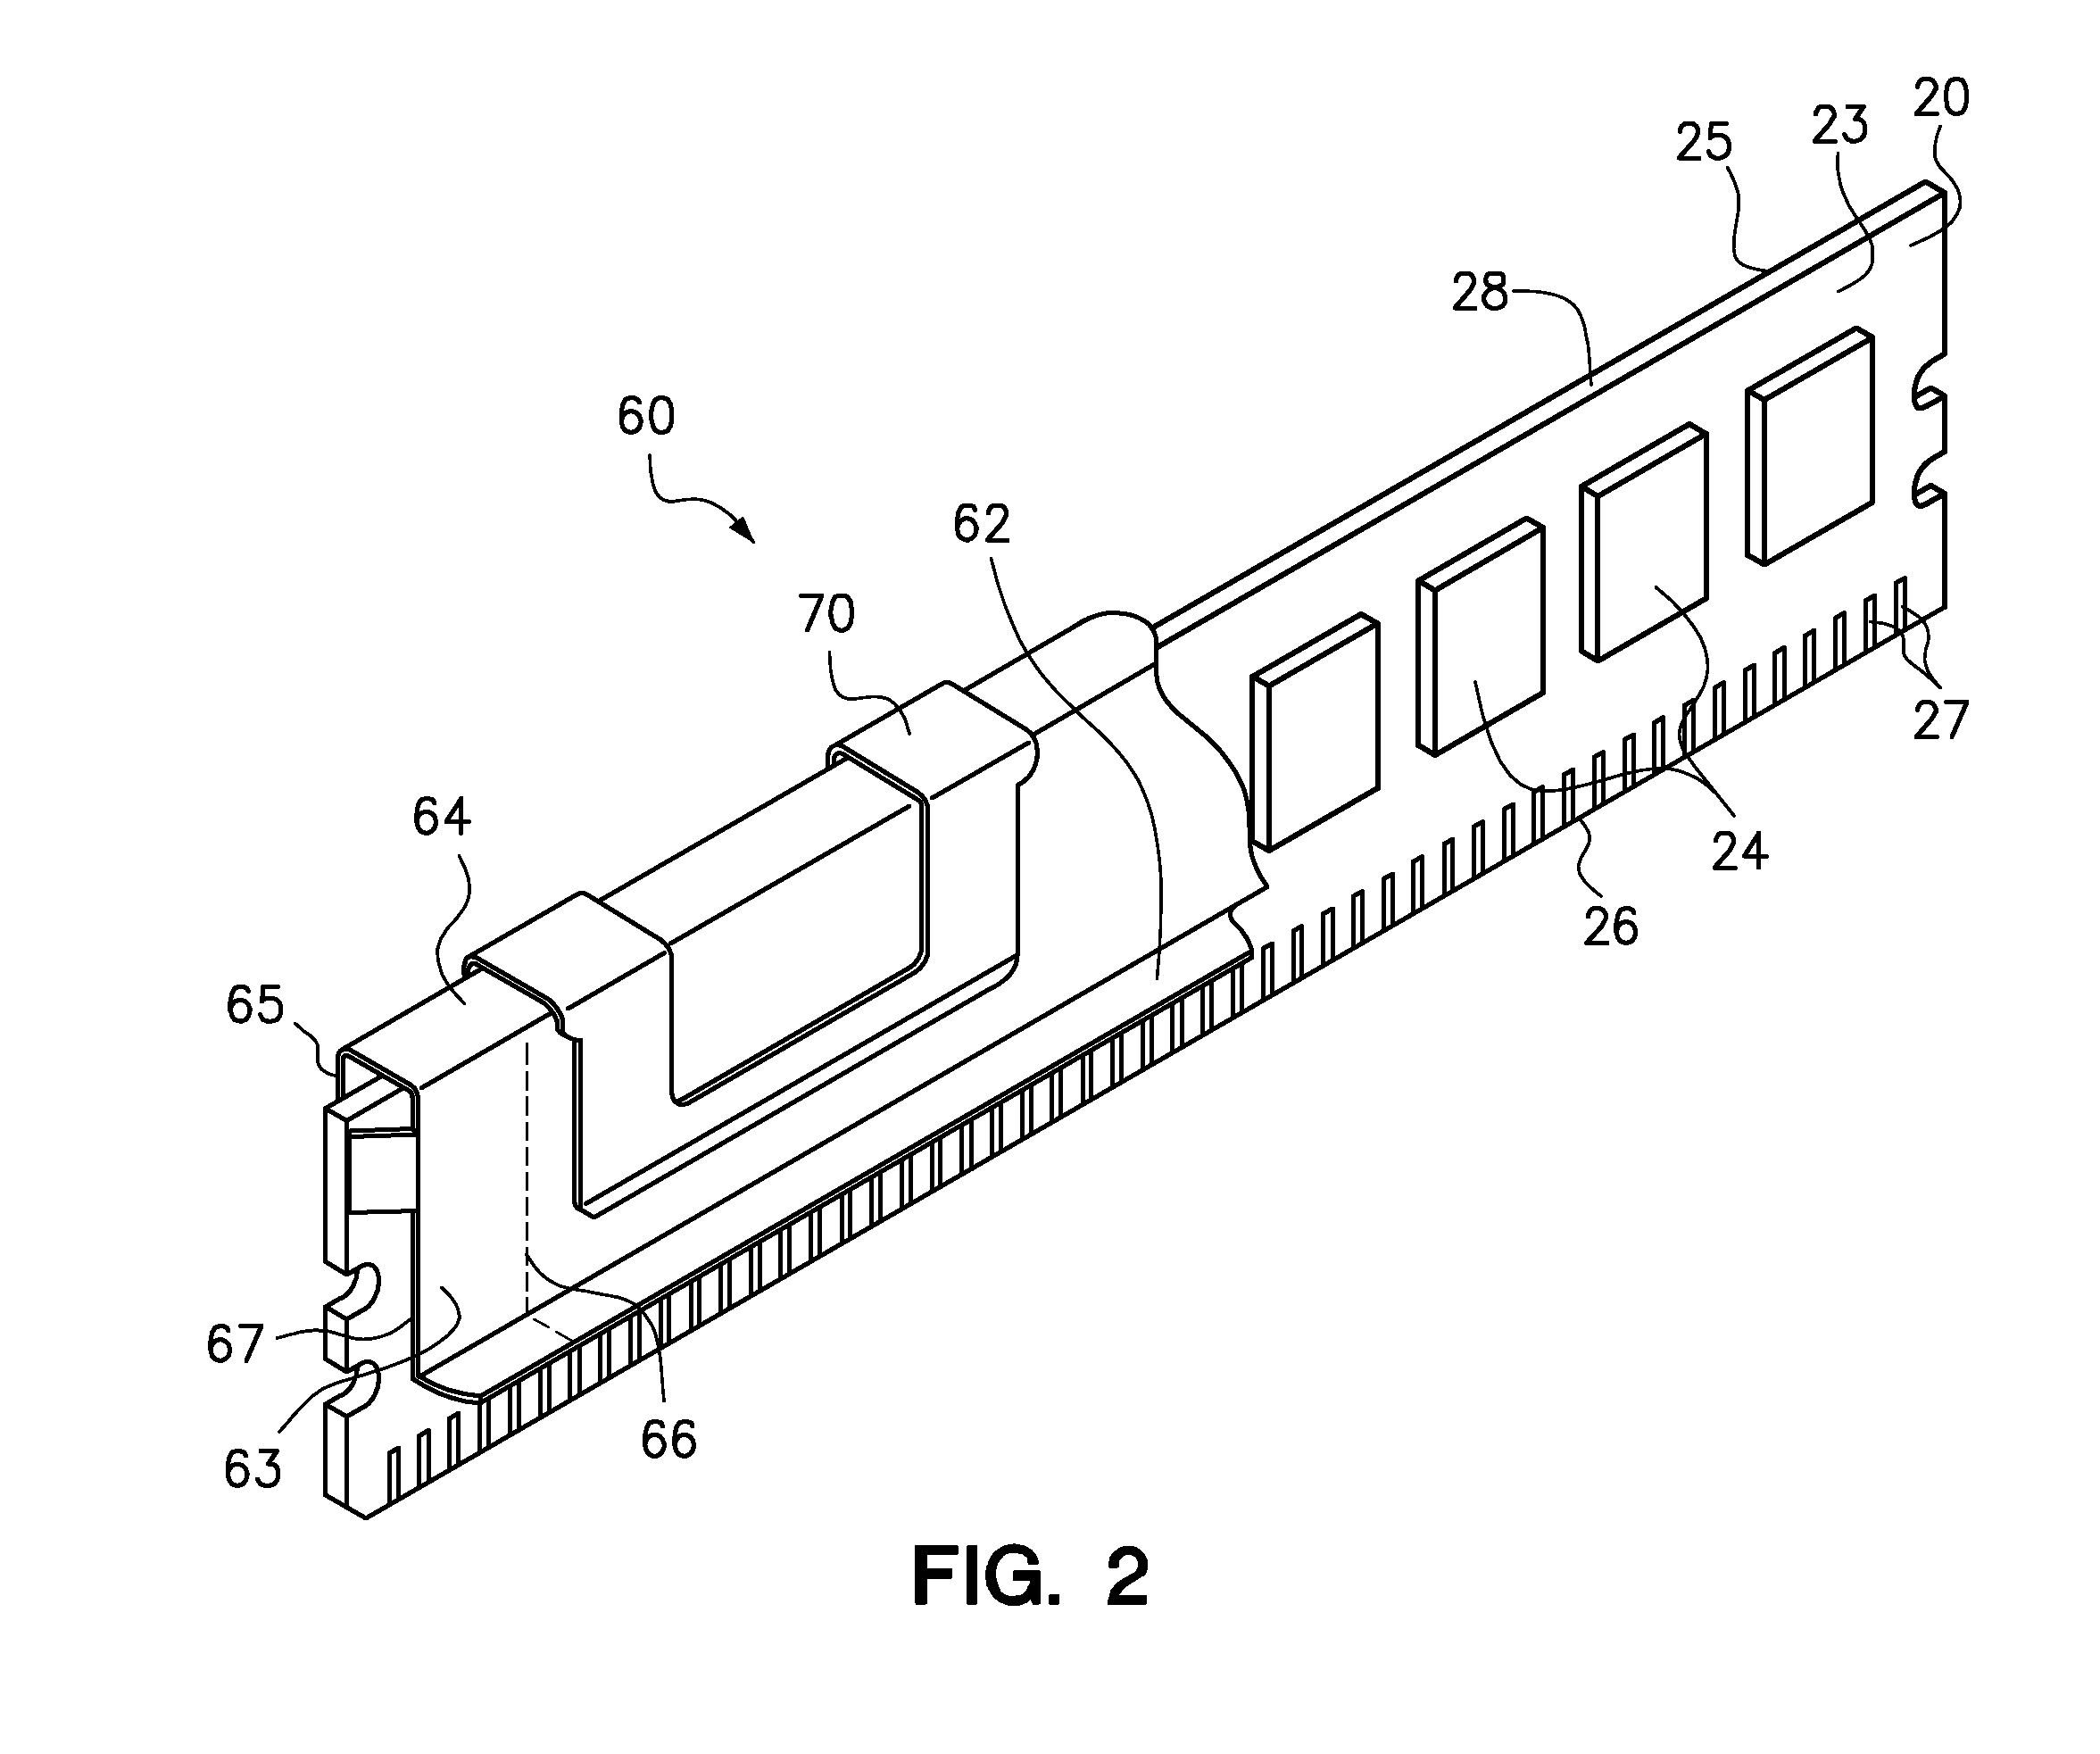 Liquid-cooling memory modules with liquid flow pipes between memory module sockets